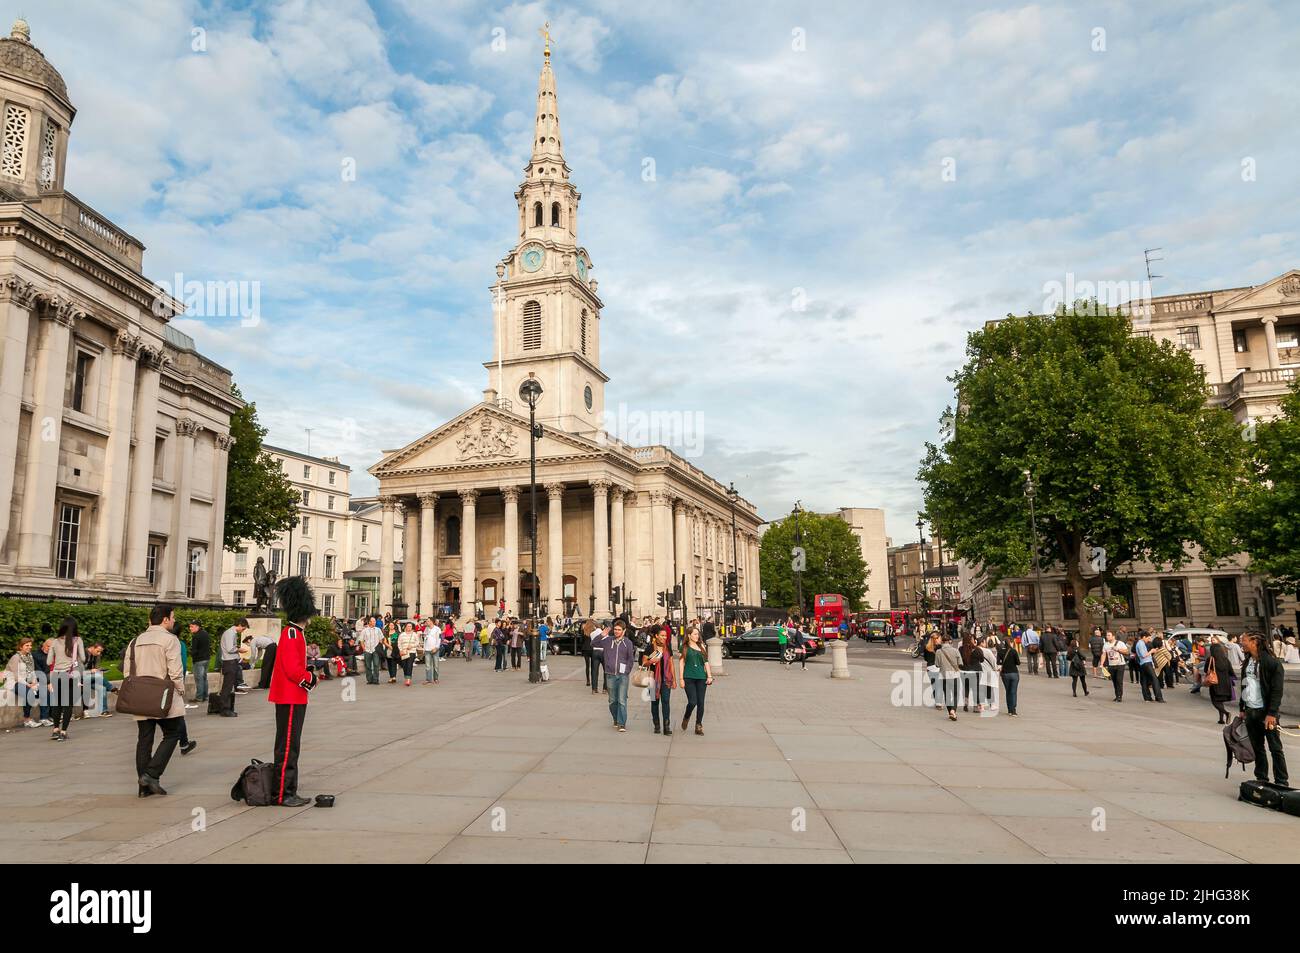 London, England, United Kingdom - September 26, 2013: People visiting the St Martin in the Fields Church in the Trafalgar Square in central London. Stock Photo